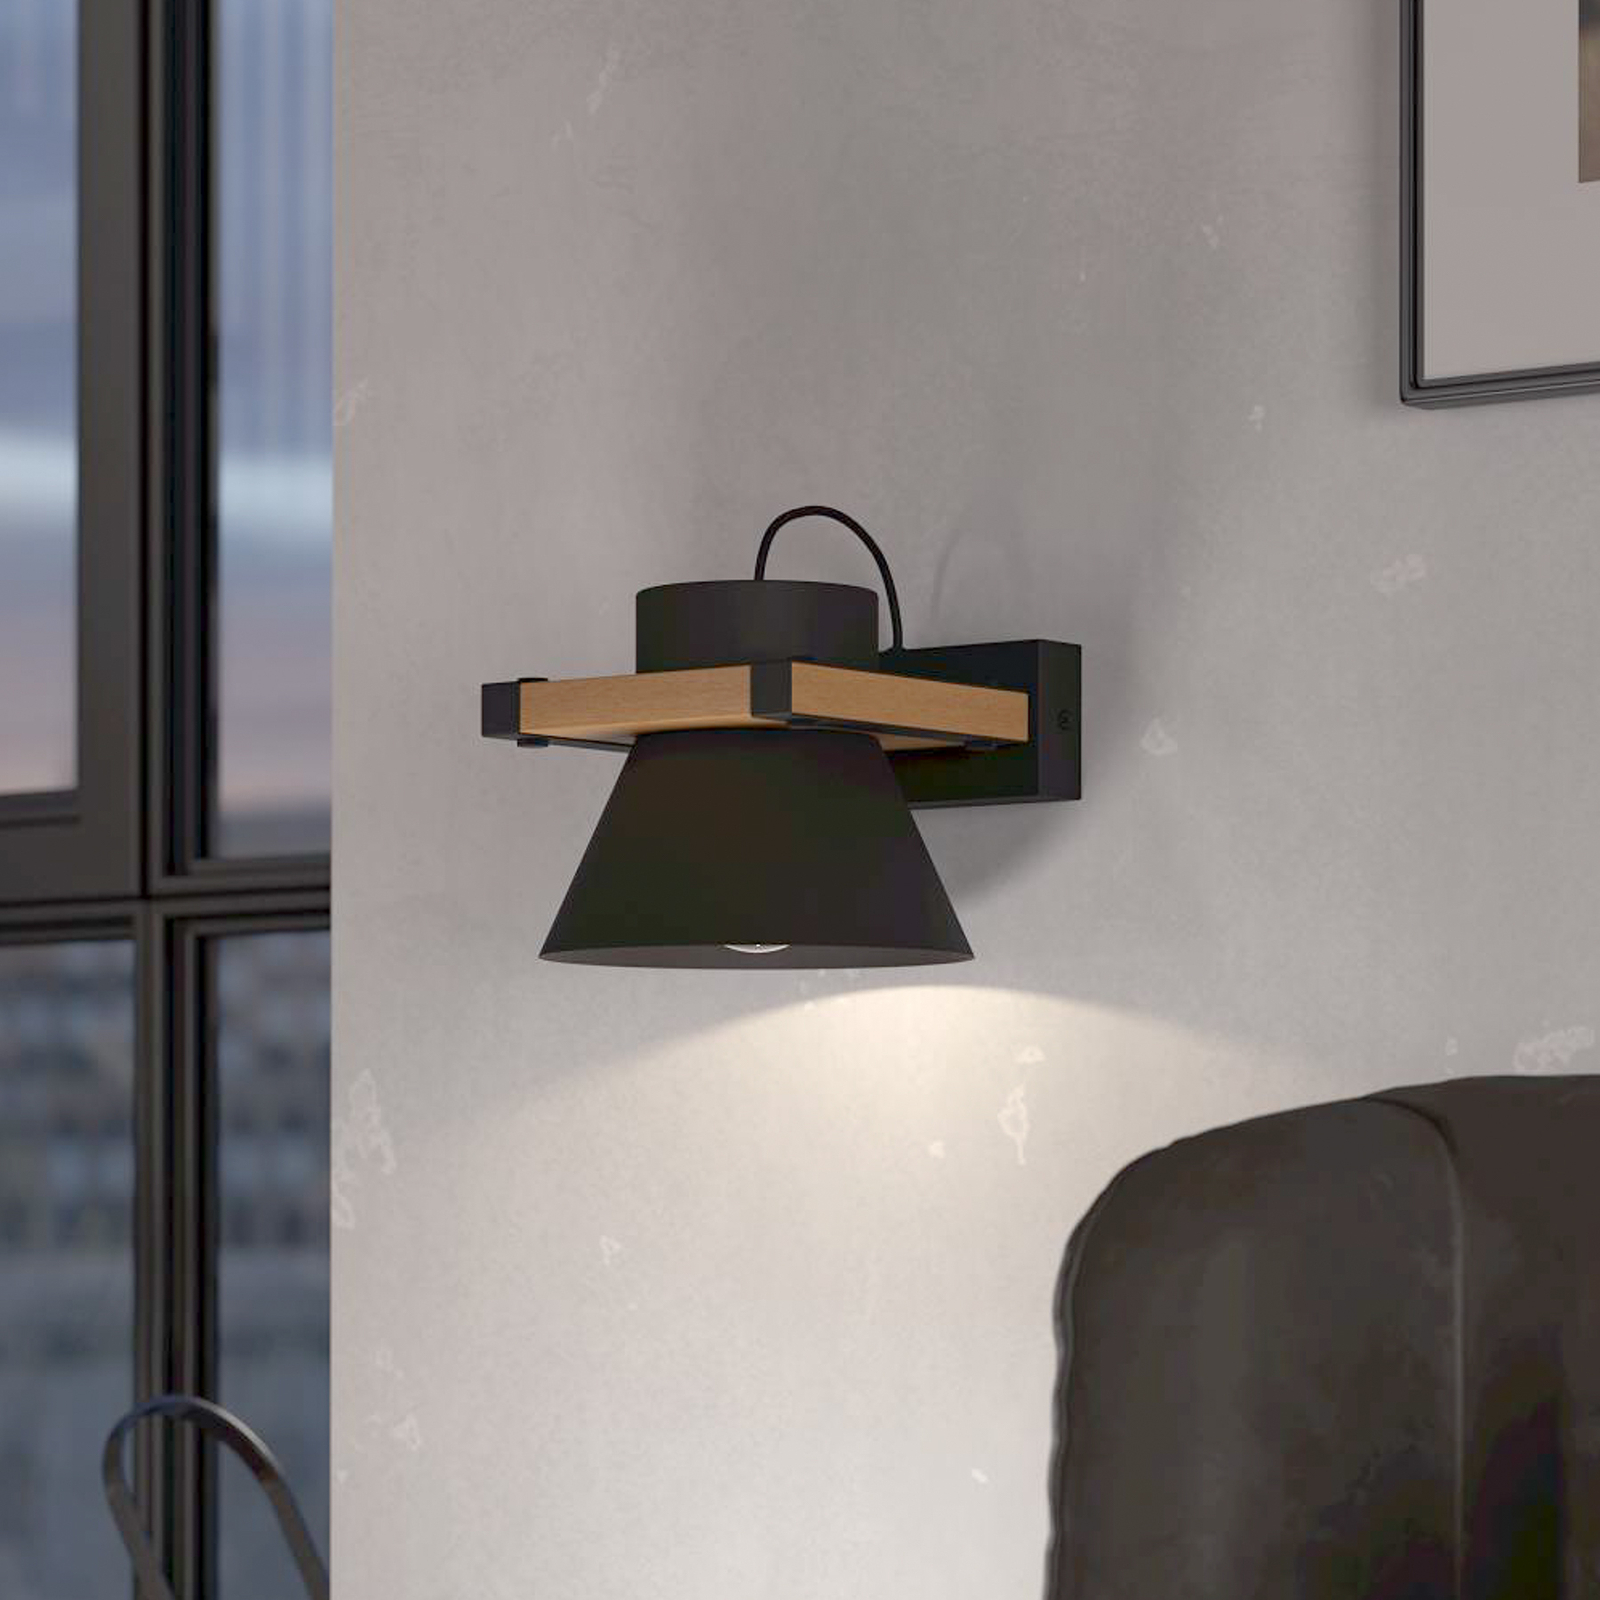 Maccles wall light in black with wood